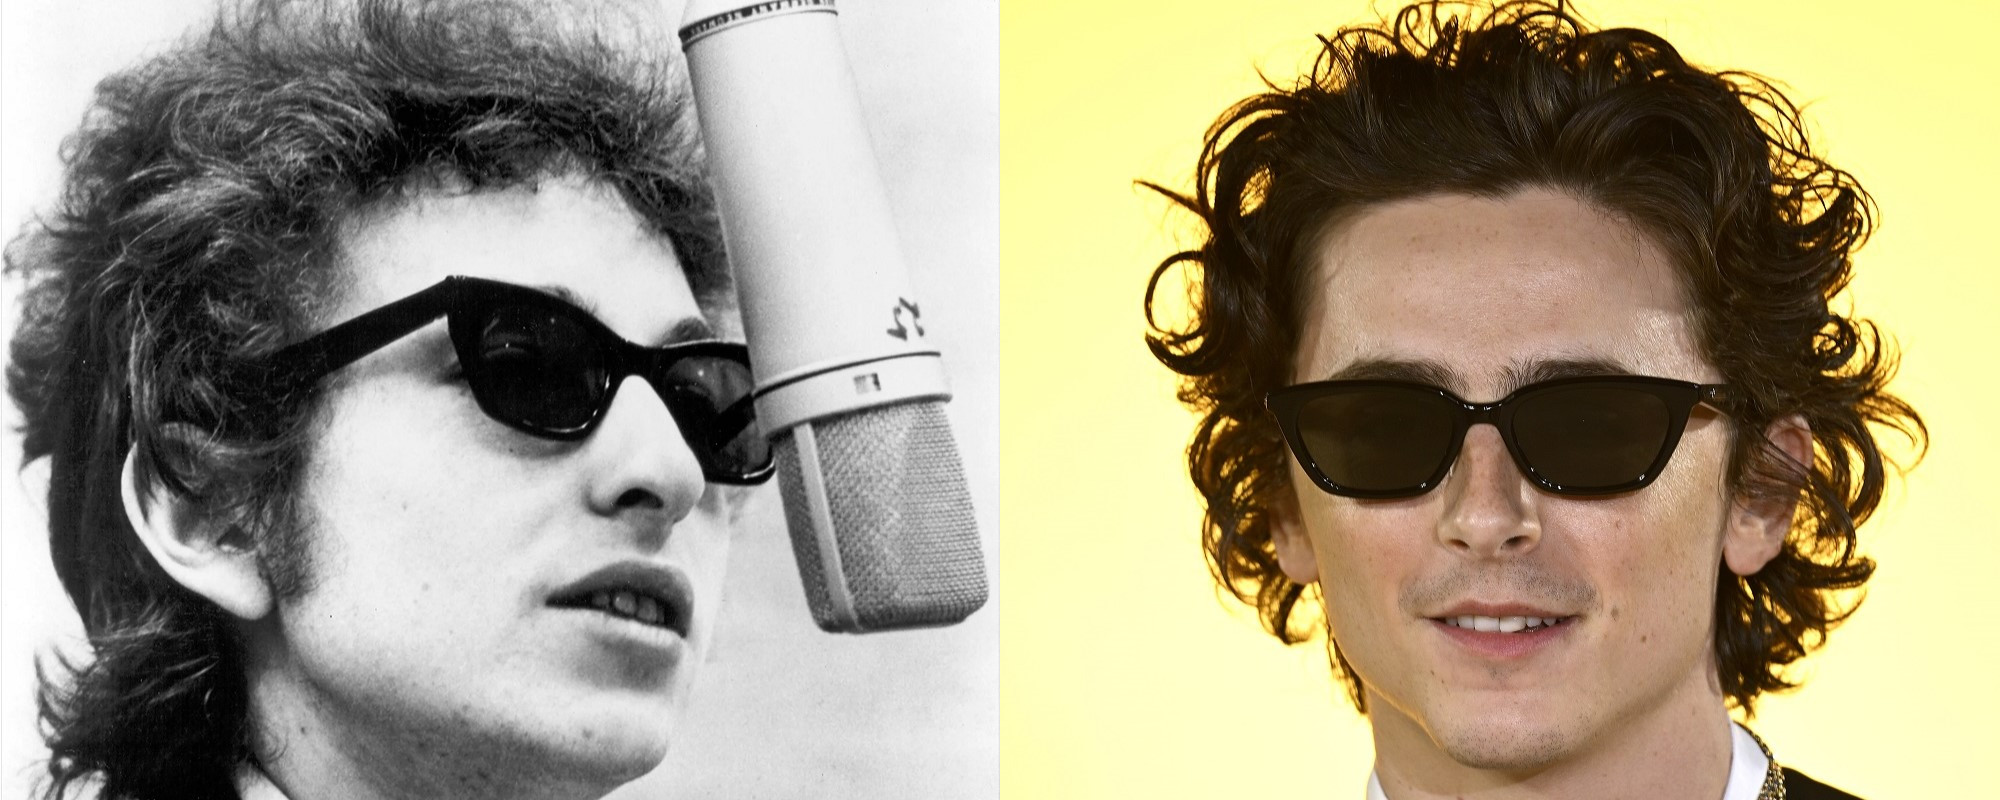 Watch Footage of Timothée Chalamet Singing as Bob Dylan on Set of ‘A Complete Unknown’ Biopic